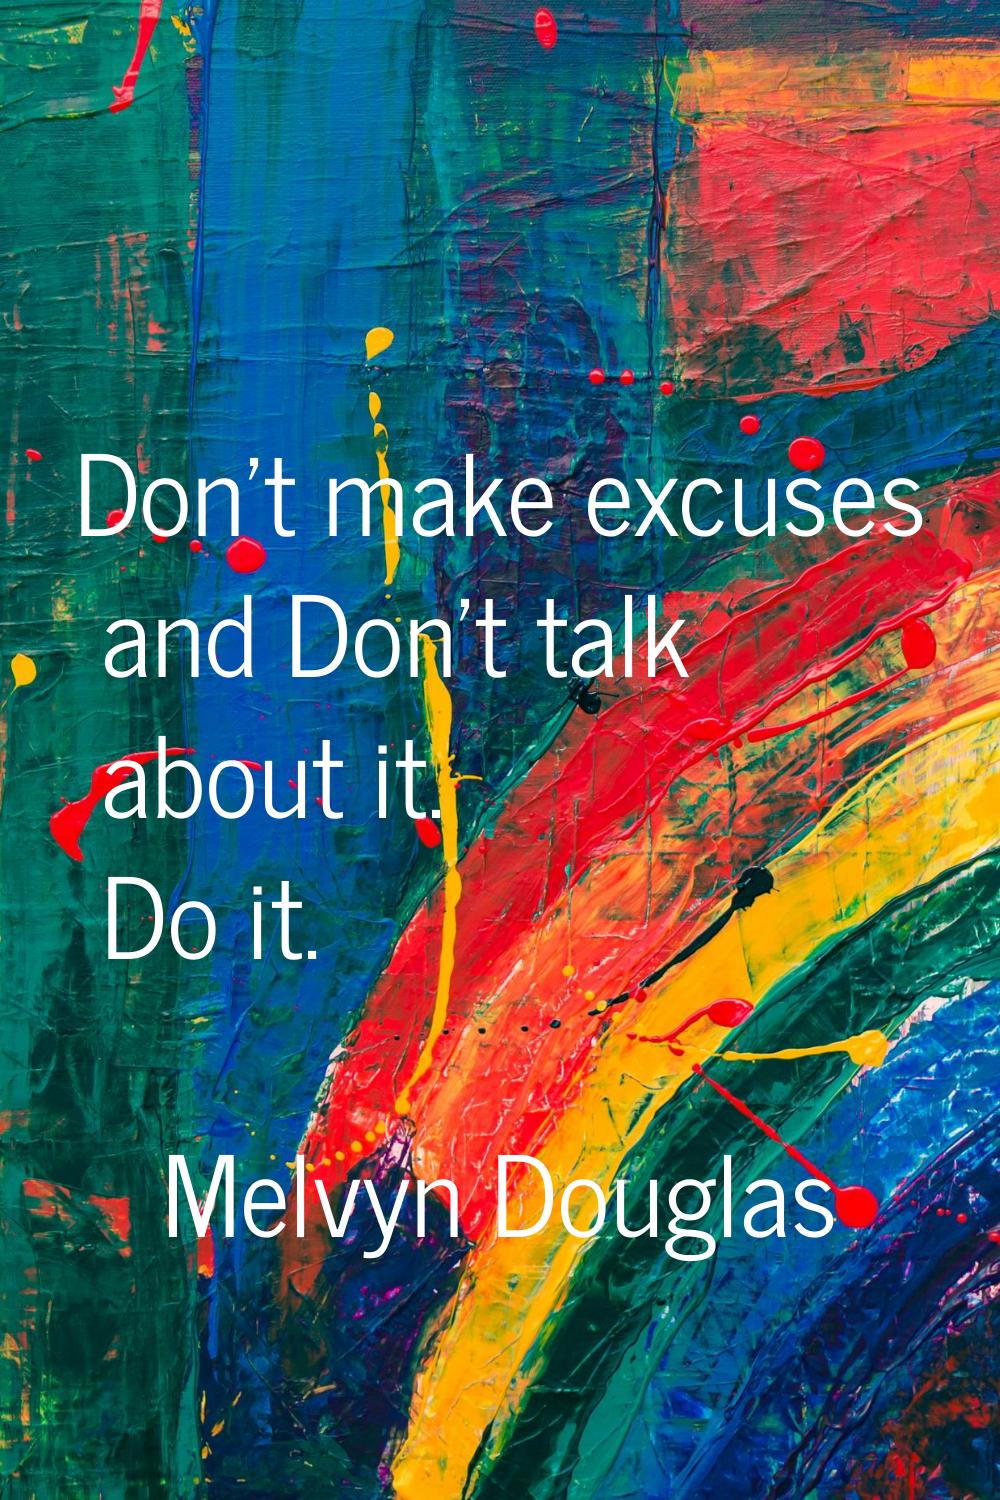 Don't make excuses and Don't talk about it. Do it.